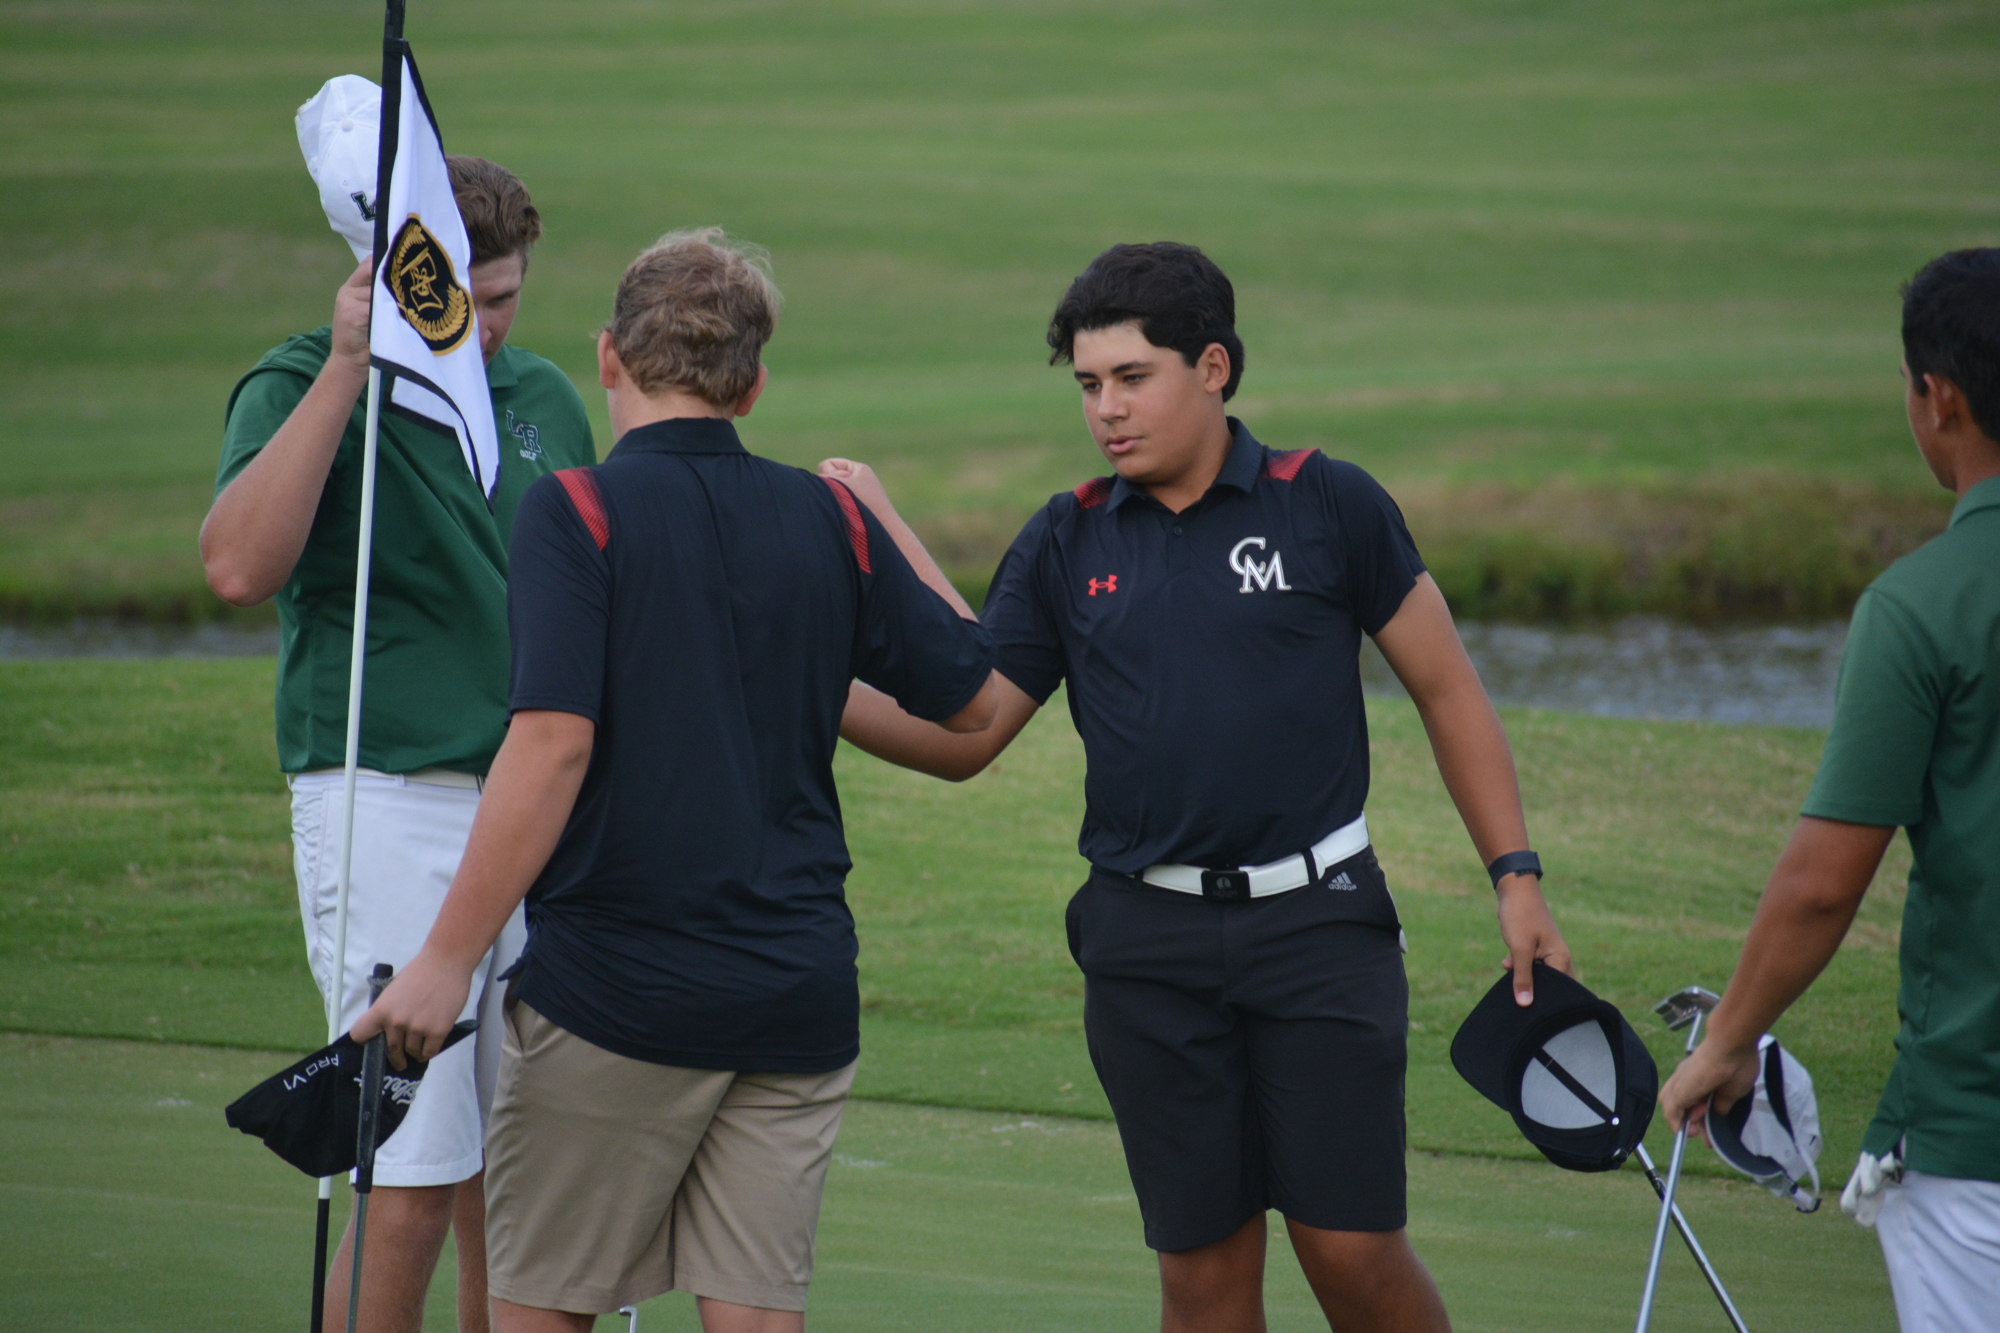 Cardinal Mooney boys golfers Tommy Tyler and Nicolas Bencomo shake hands with each other and with Lakewood Ranch High players after a Tuesday match at Laurel Oak Country Club. (Photo by Ryan Kohn.)